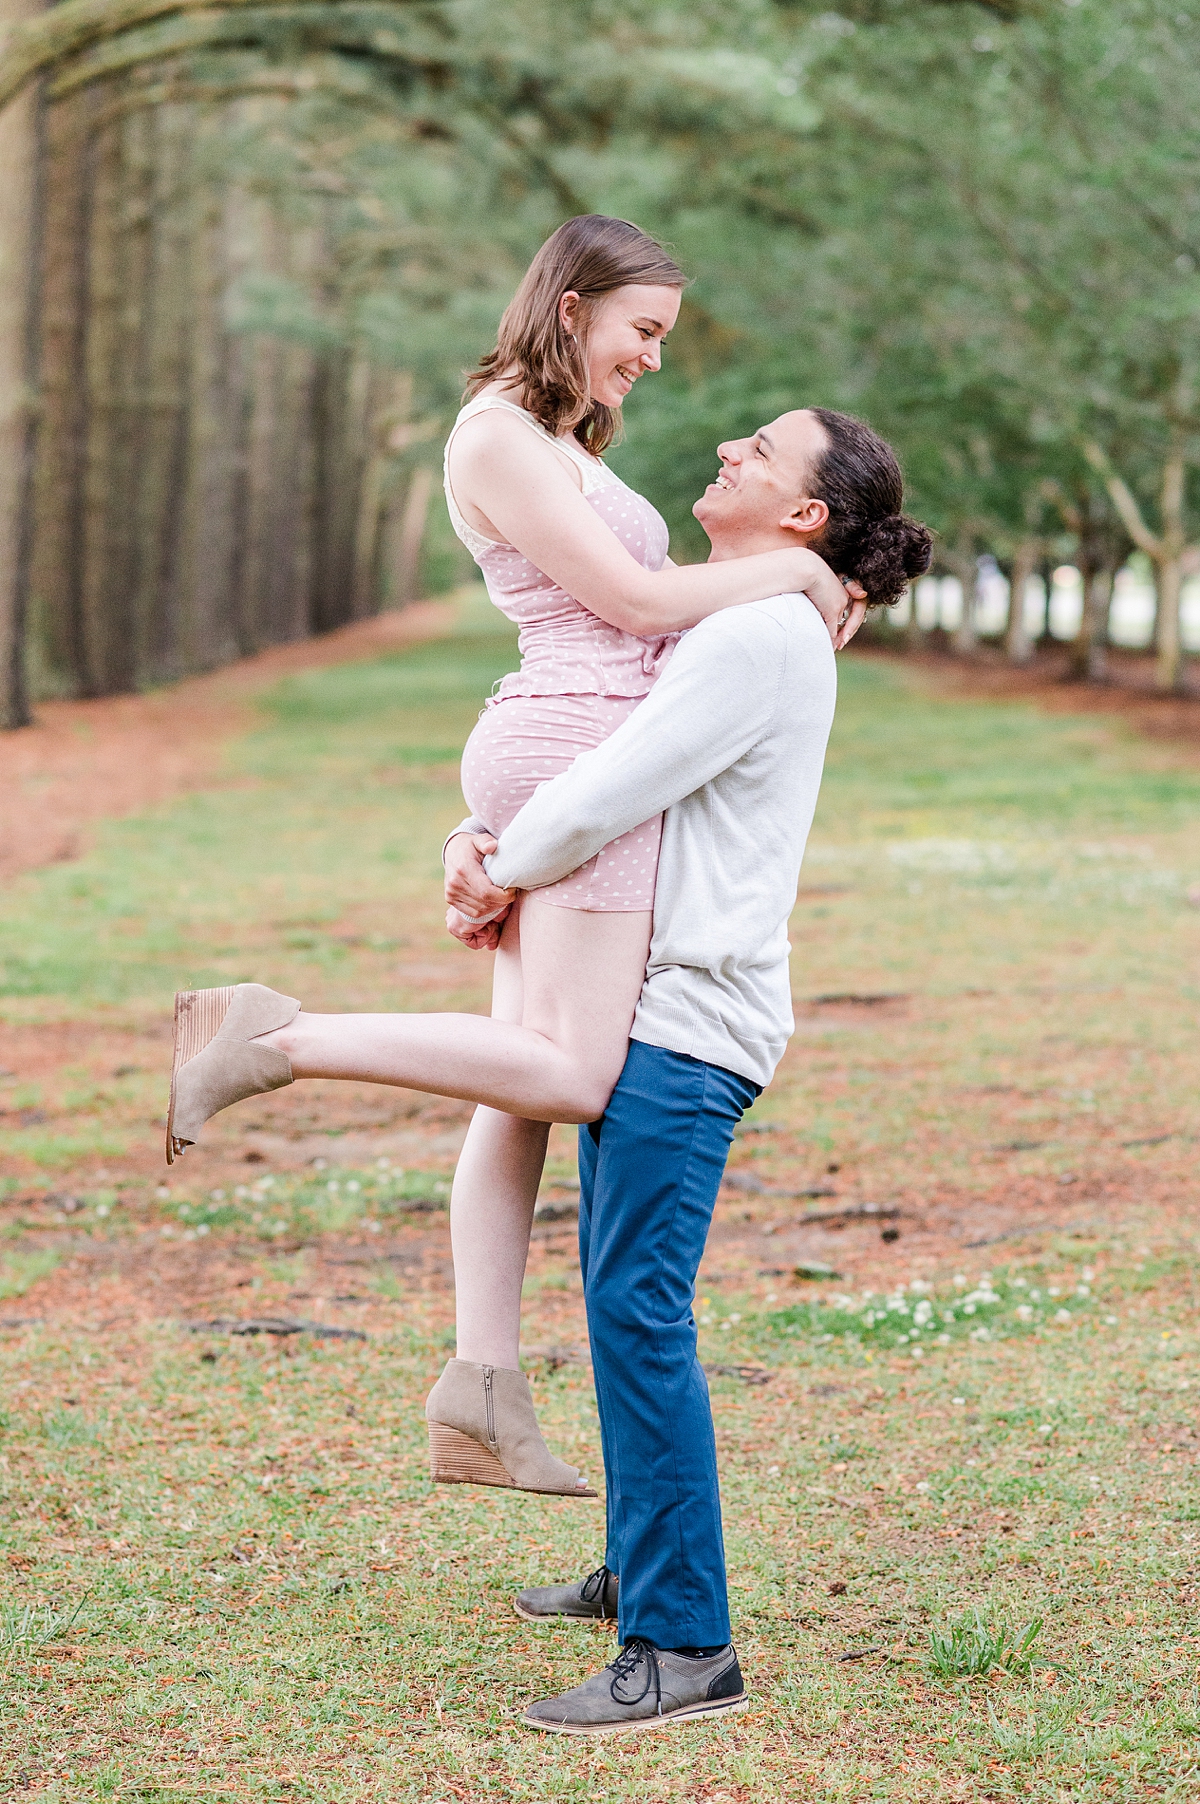 Scissor kick lift during spring Red Wing Park Engagement Session with arching trees. Photography by Virginia Beach Wedding Photographer Kailey Brianne Photography. 